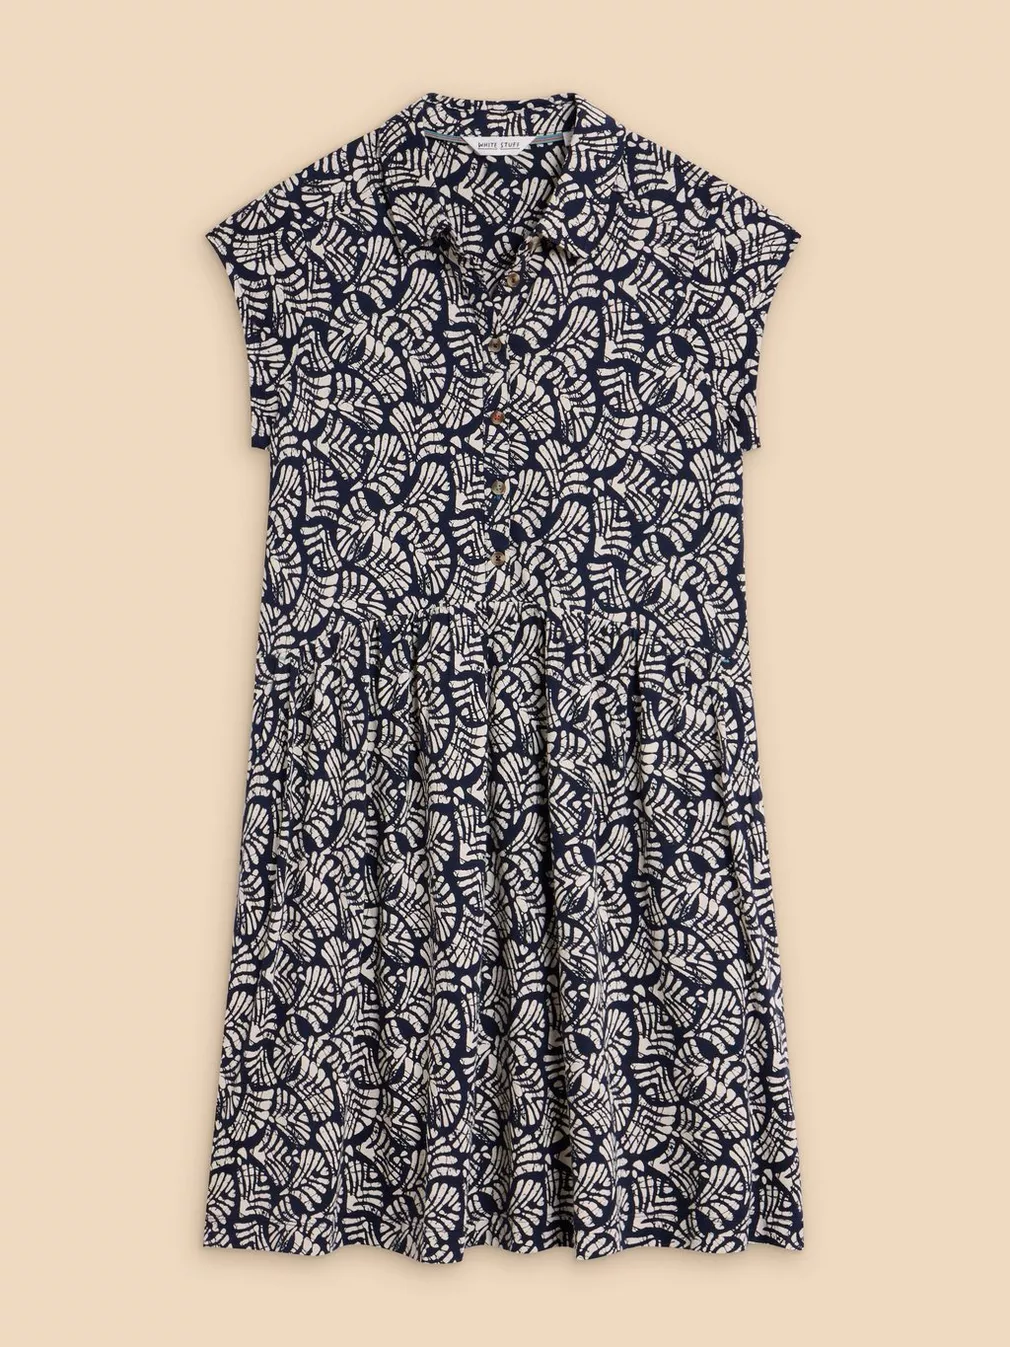 White Stuff Everly Jersey Shirt Dress - Navy Print Clothing - Dresses + Jumpsuits - Dresses - Short Dresses by White Stuff | Grace the Boutique